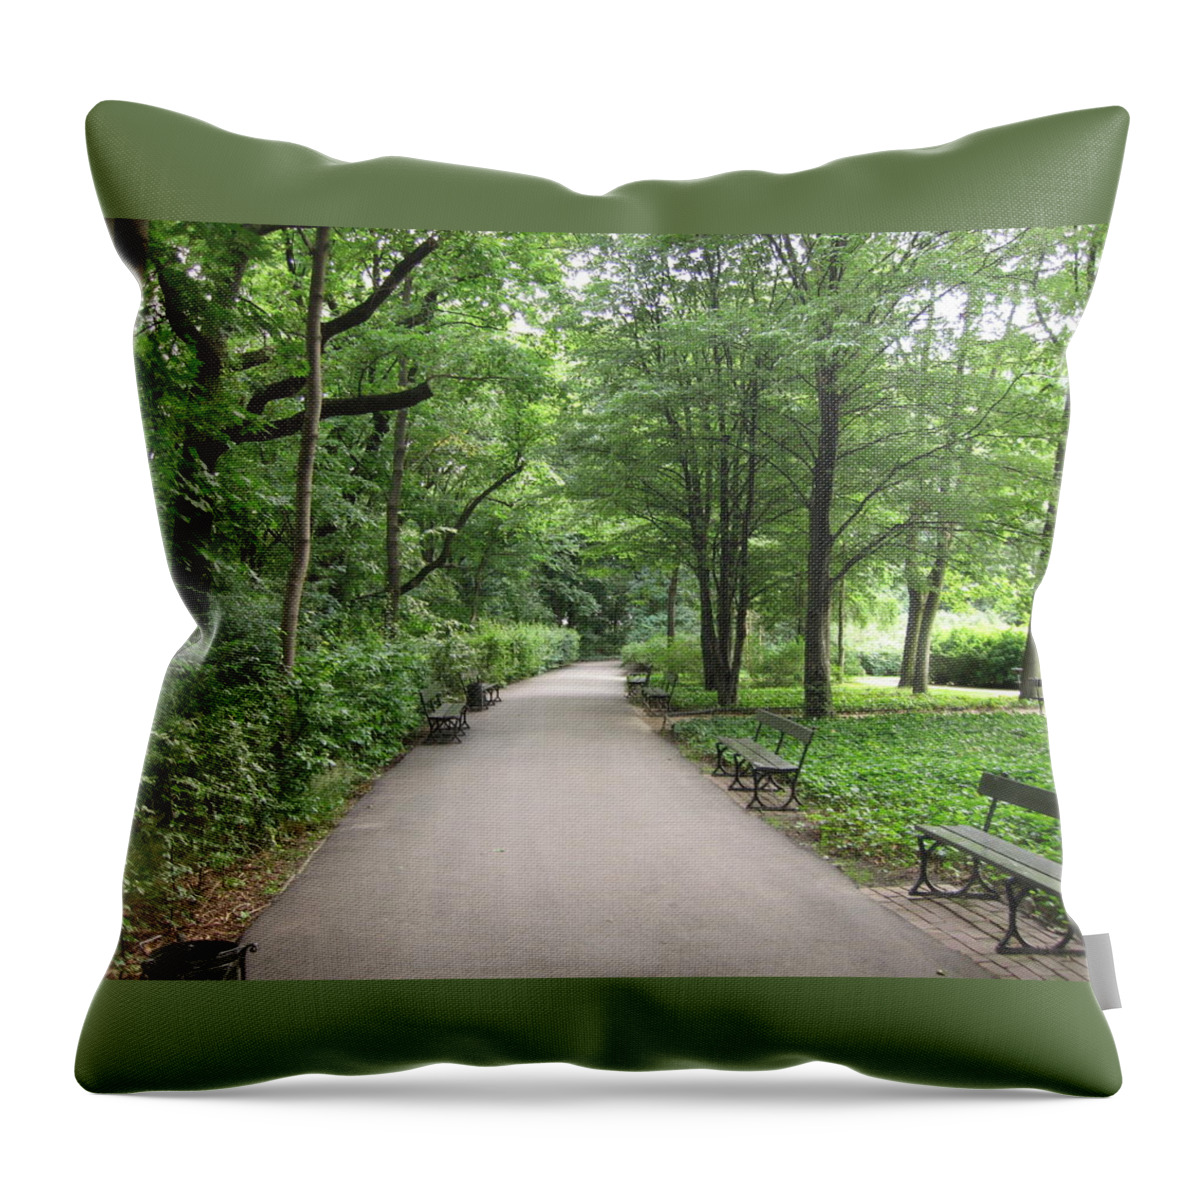  Throw Pillow featuring the photograph Park Bench Poland by Nora Boghossian